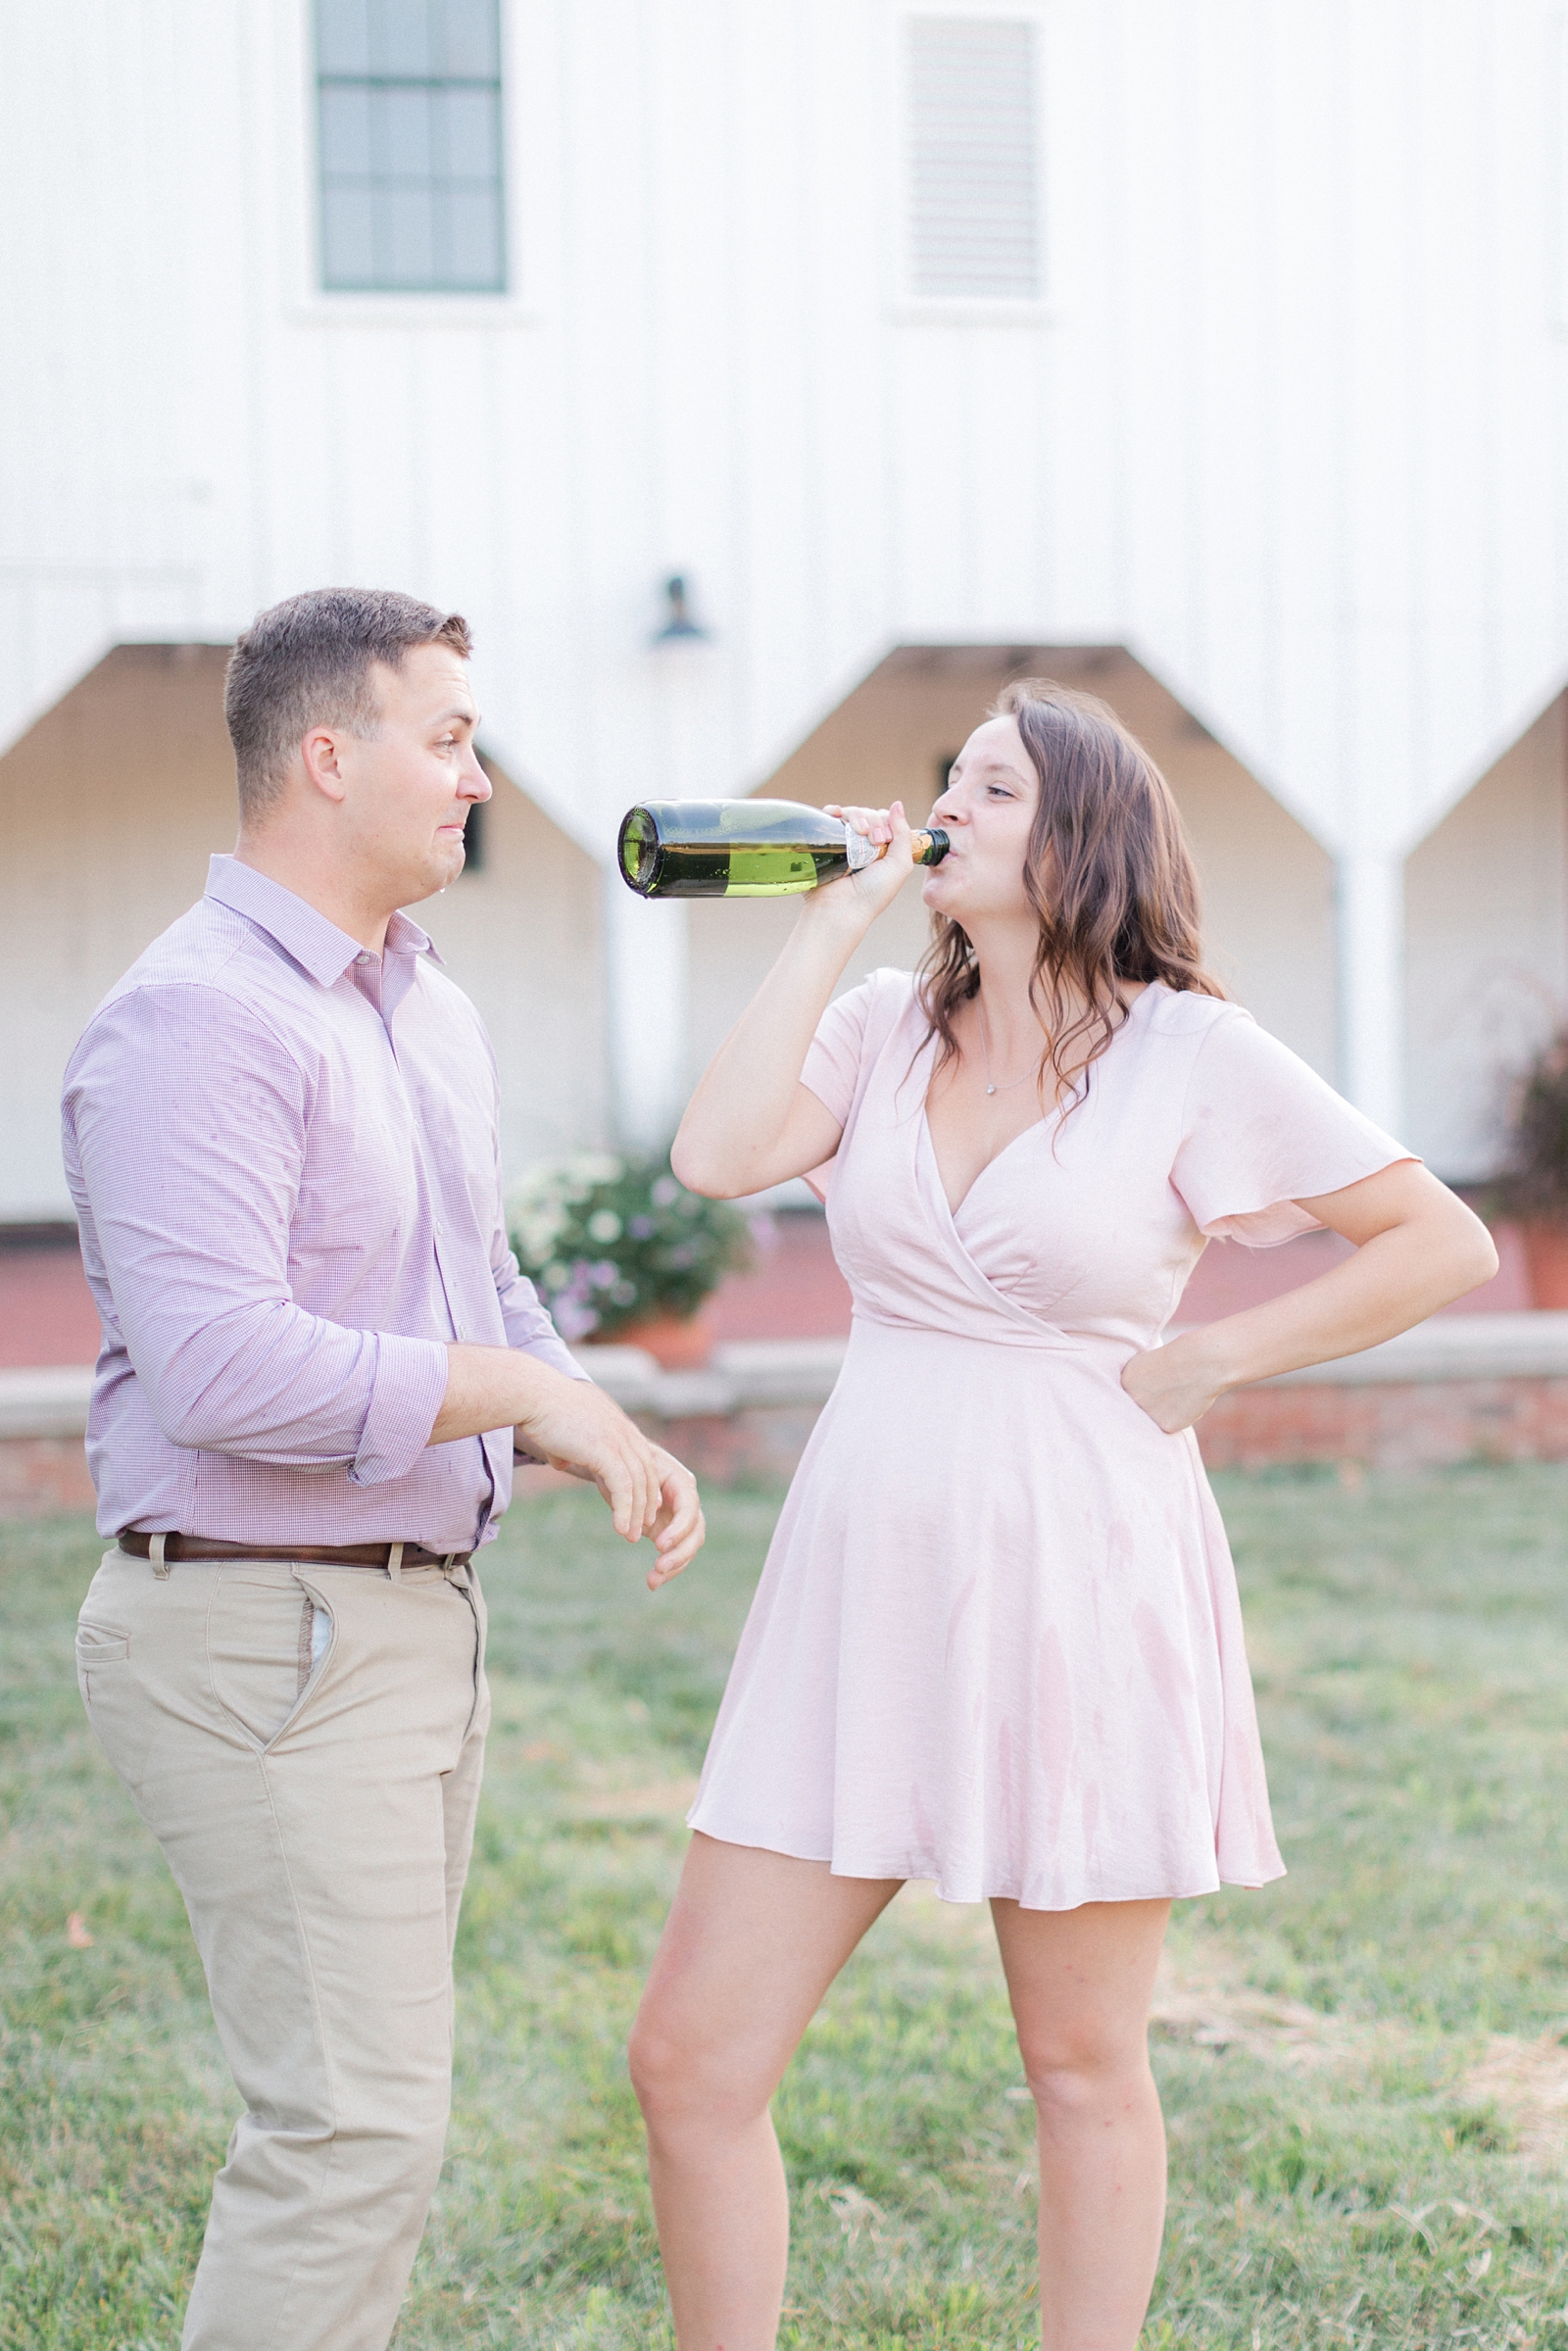 What to Bring for Your Engagement Session